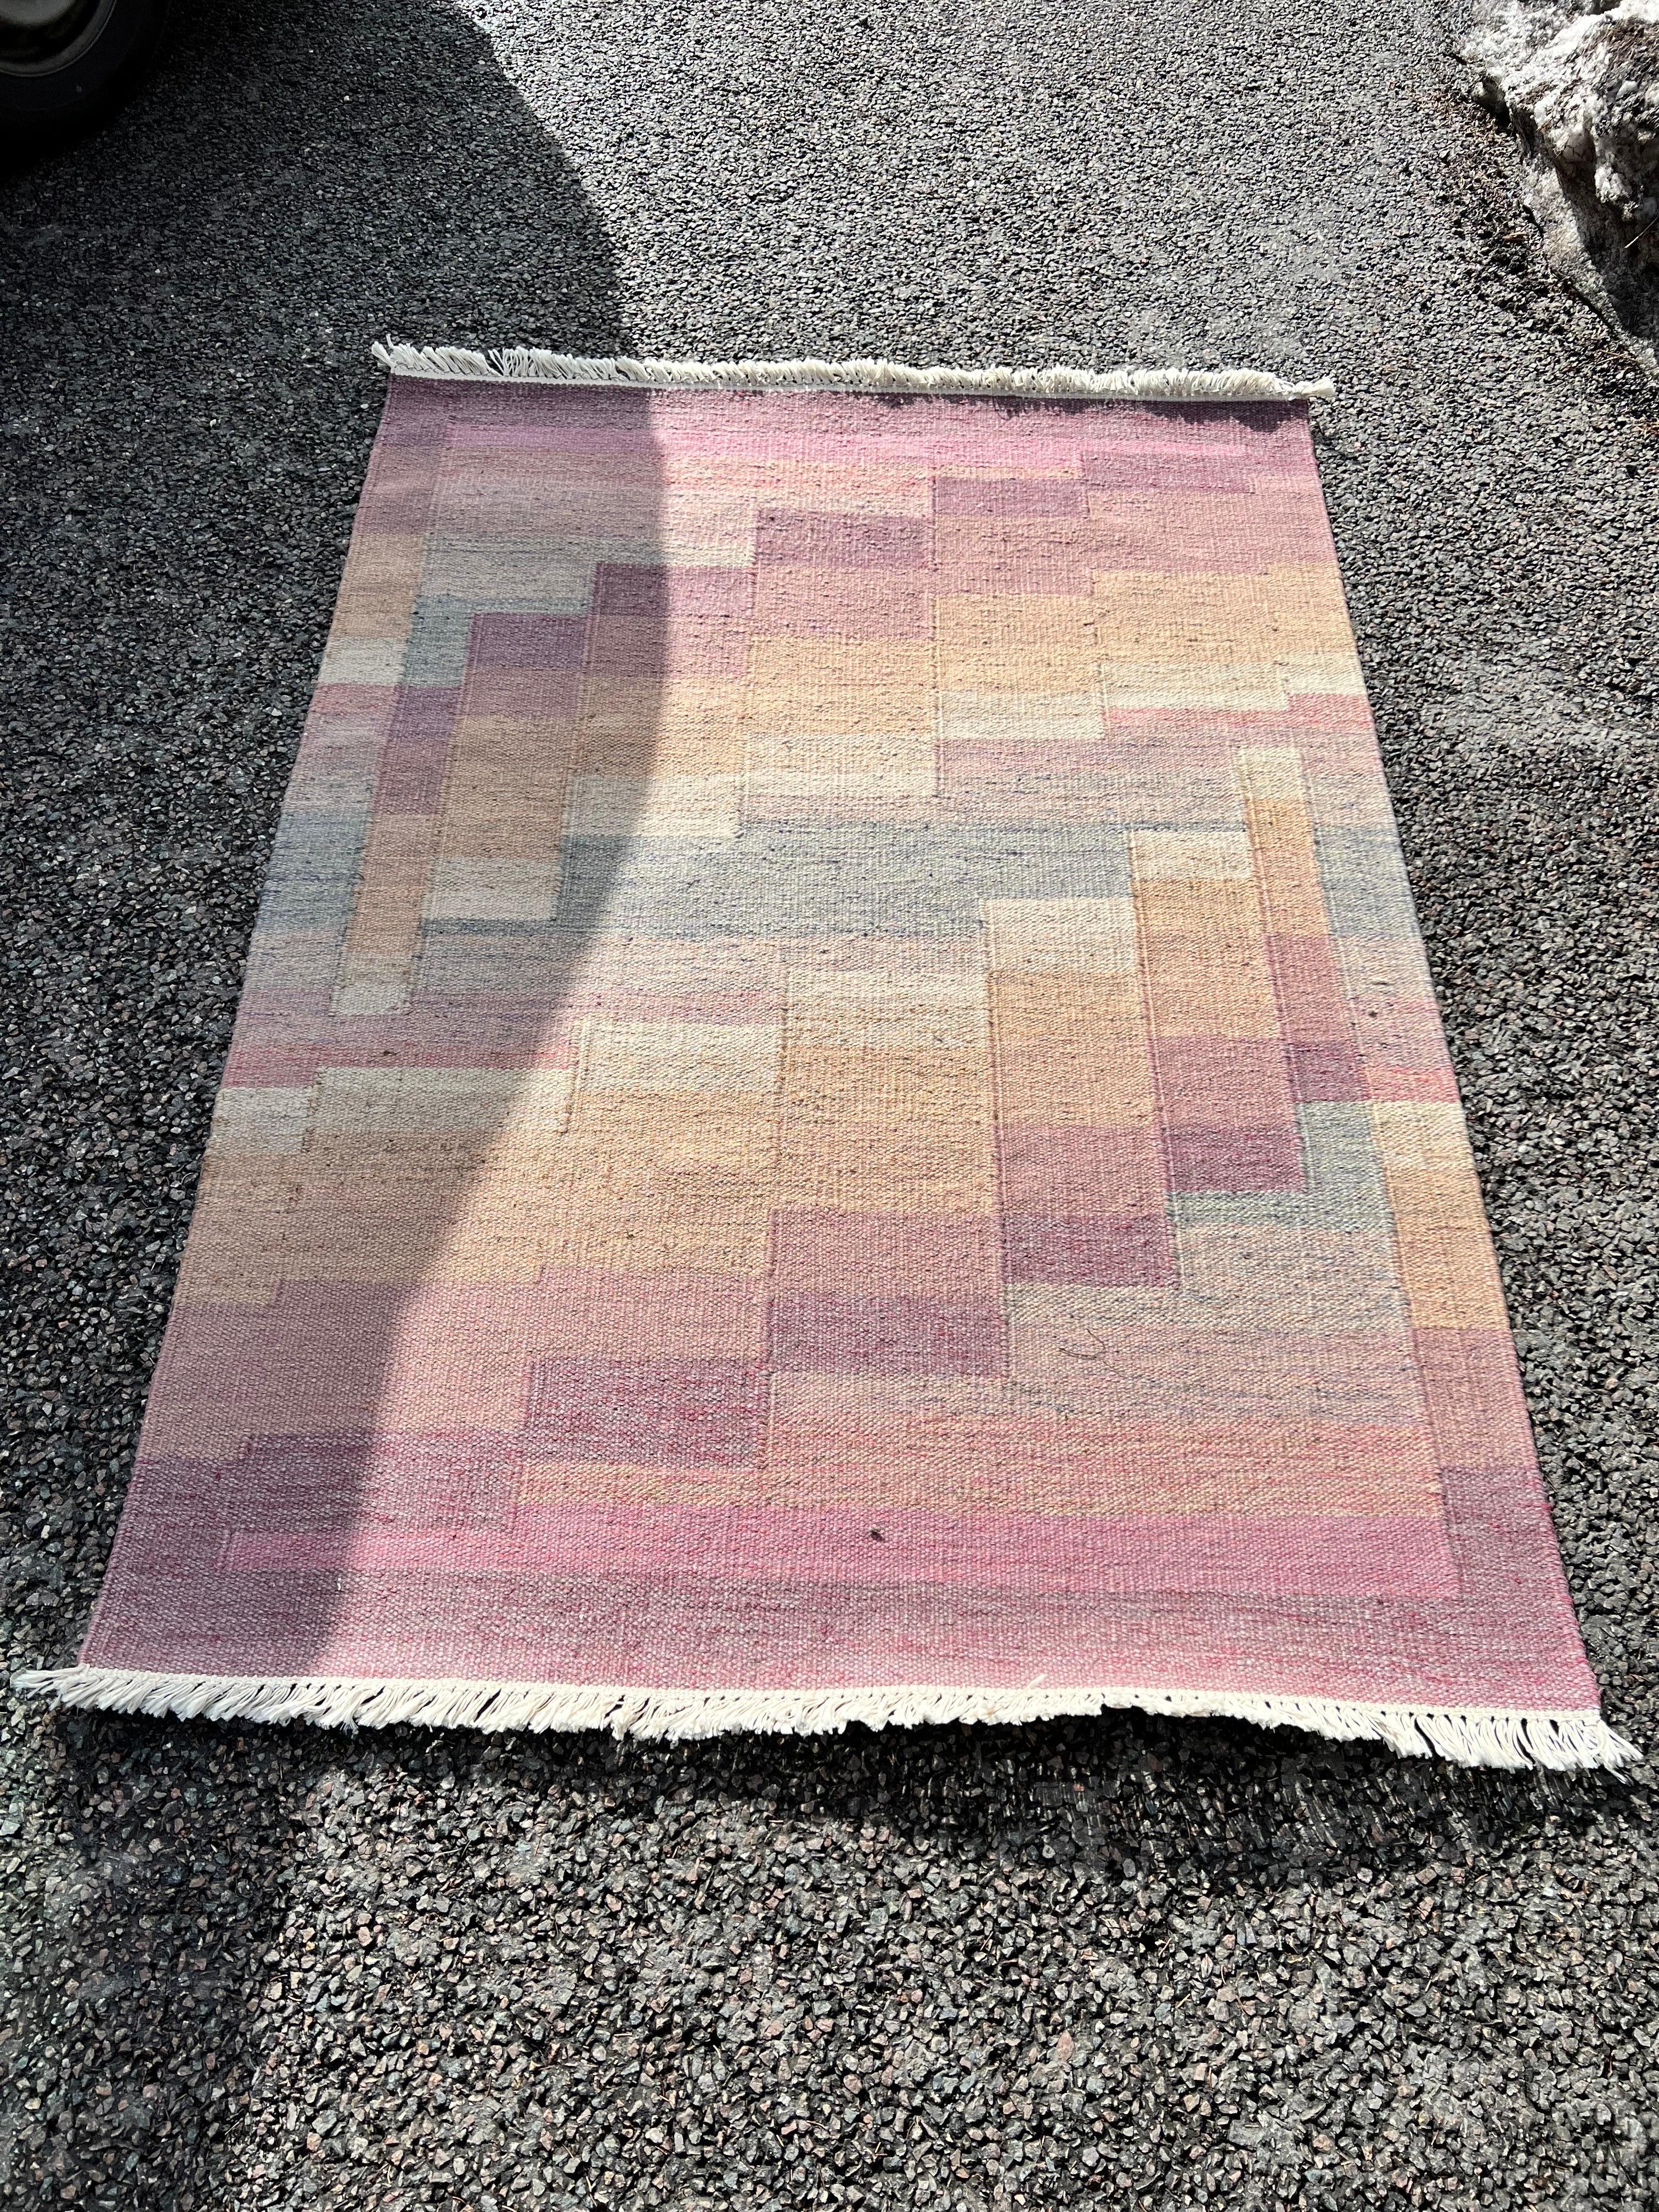 Swedish elegant pink and grey with geometric patterns. Made of wool. It is very soft and in excellent condition for its age. Designed and produced in the 1950s. All fringe are in good condition. It would be a good addition in any rooms of the house.